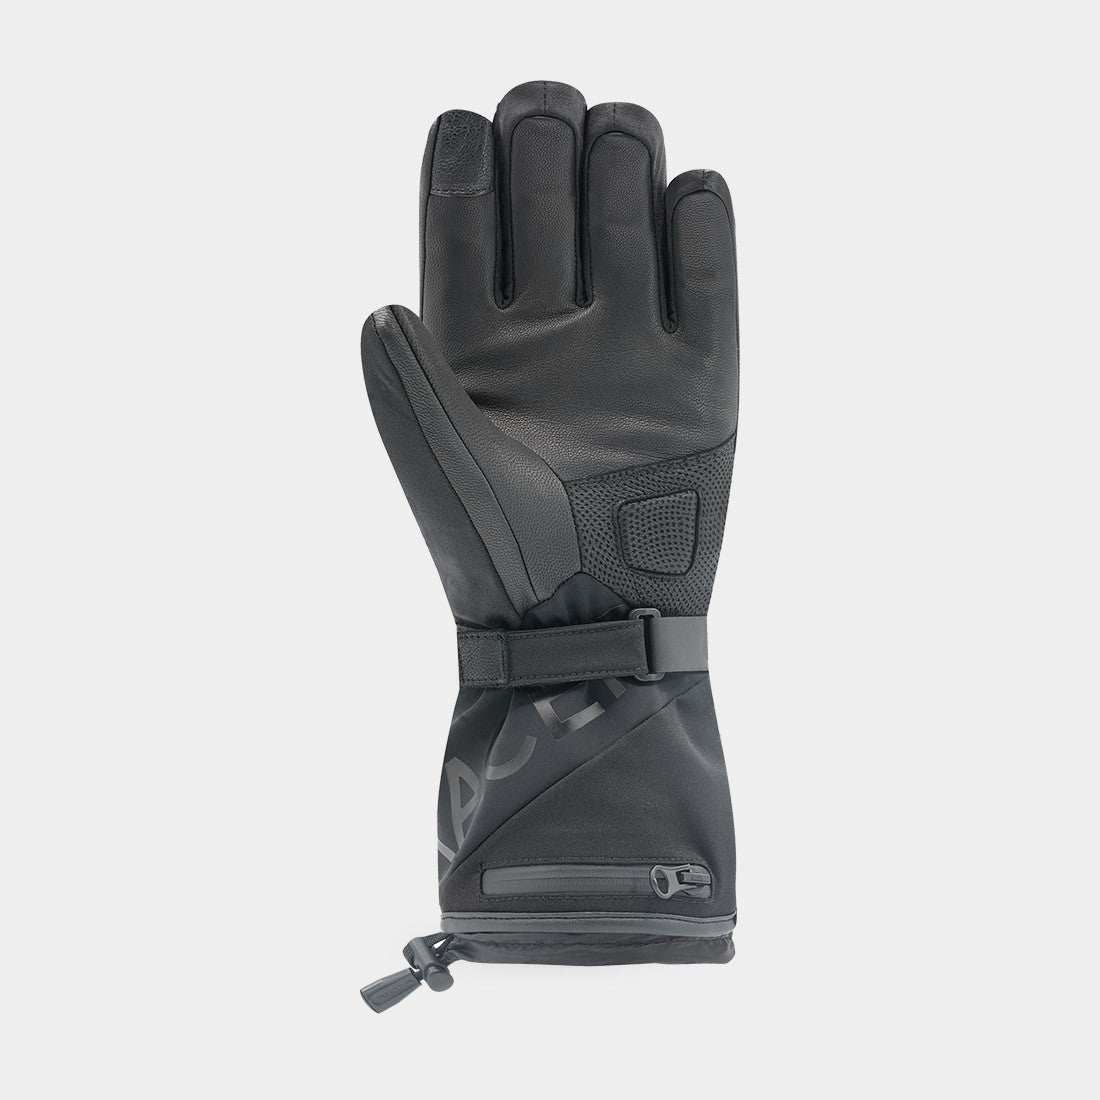 Racer Connectic 5 Gloves